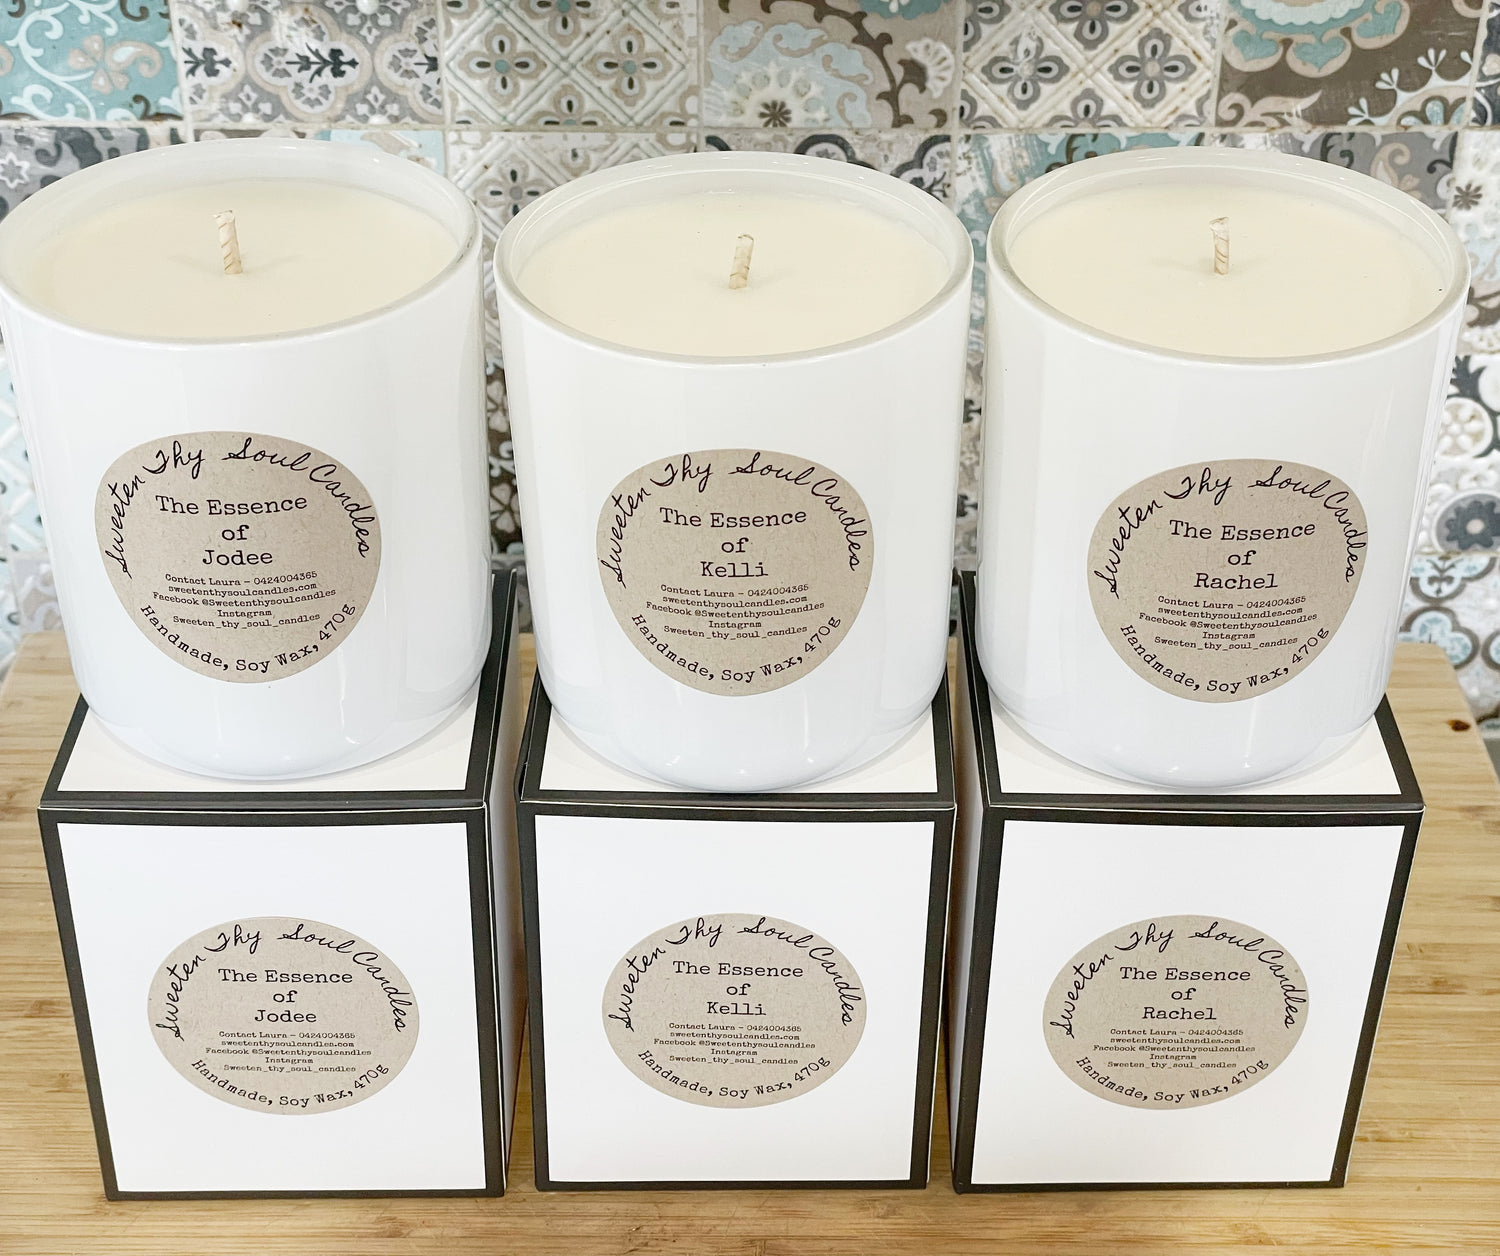 Discover "The Essence of" range. Personalised soy candles $35.95 each